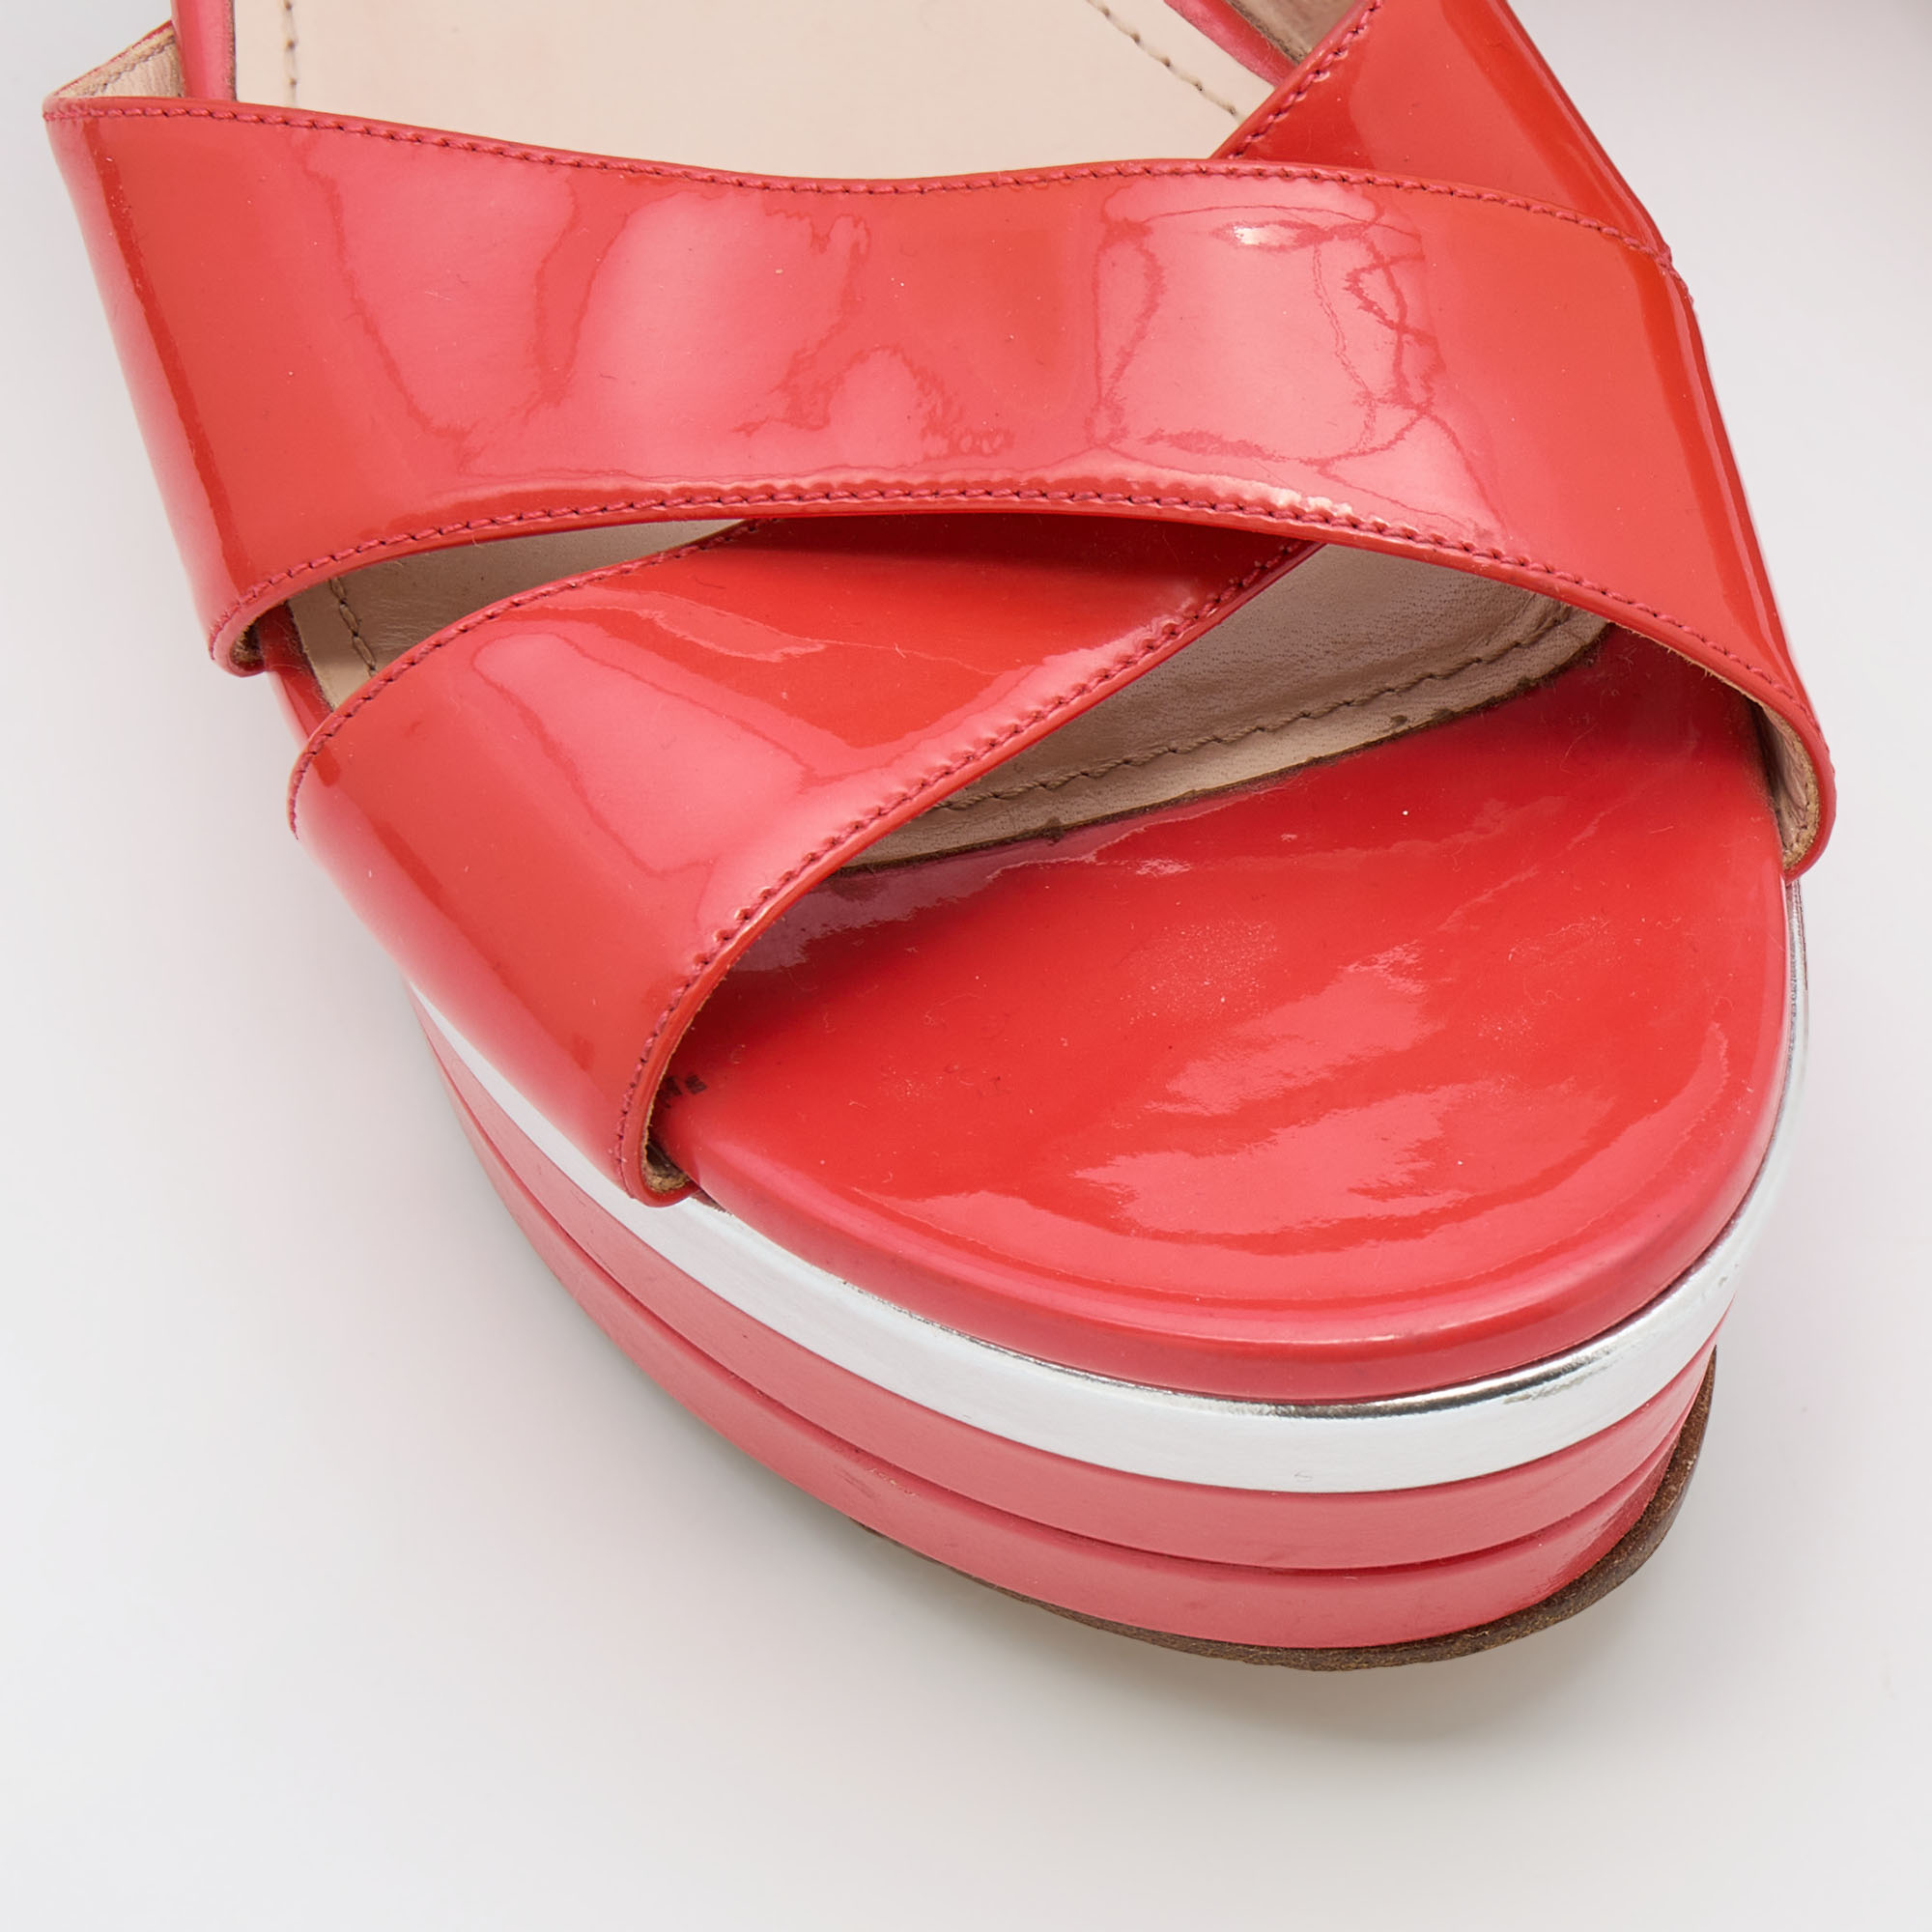 Miu Miu Coral Red Patent Leather Wedge Platform Ankle Strap Sandals Size 40